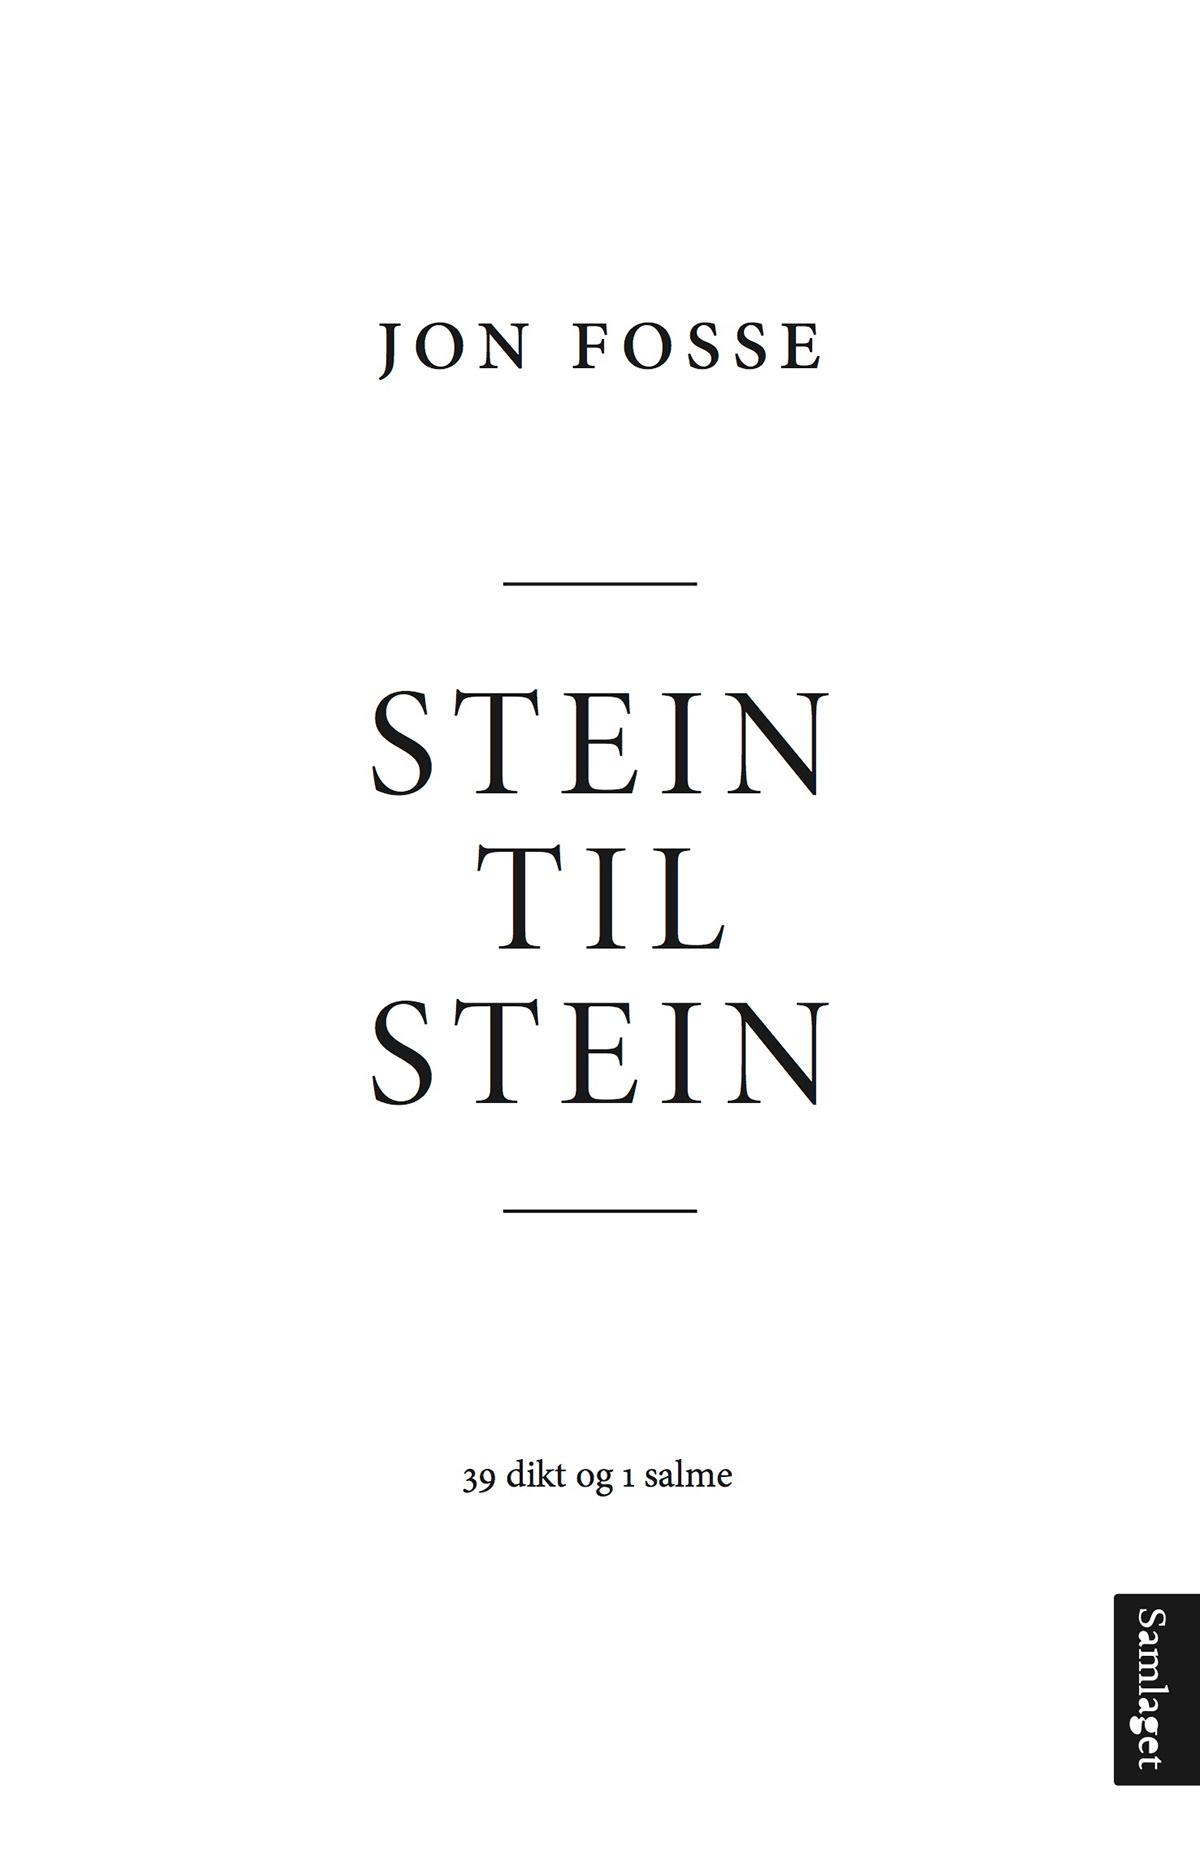 jon fosse book cover poems Playwright